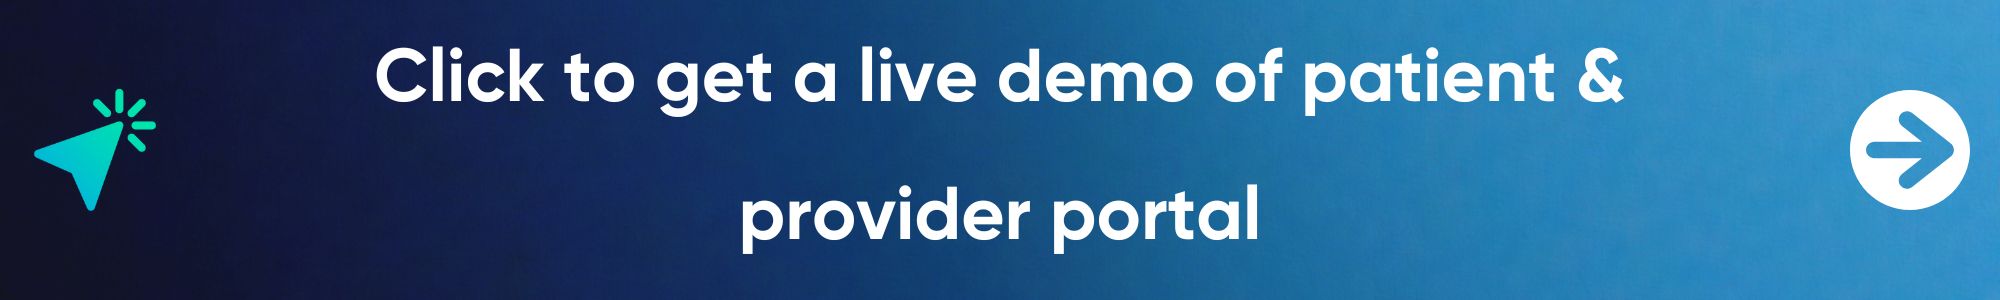 CTA to live demo of patient and provider